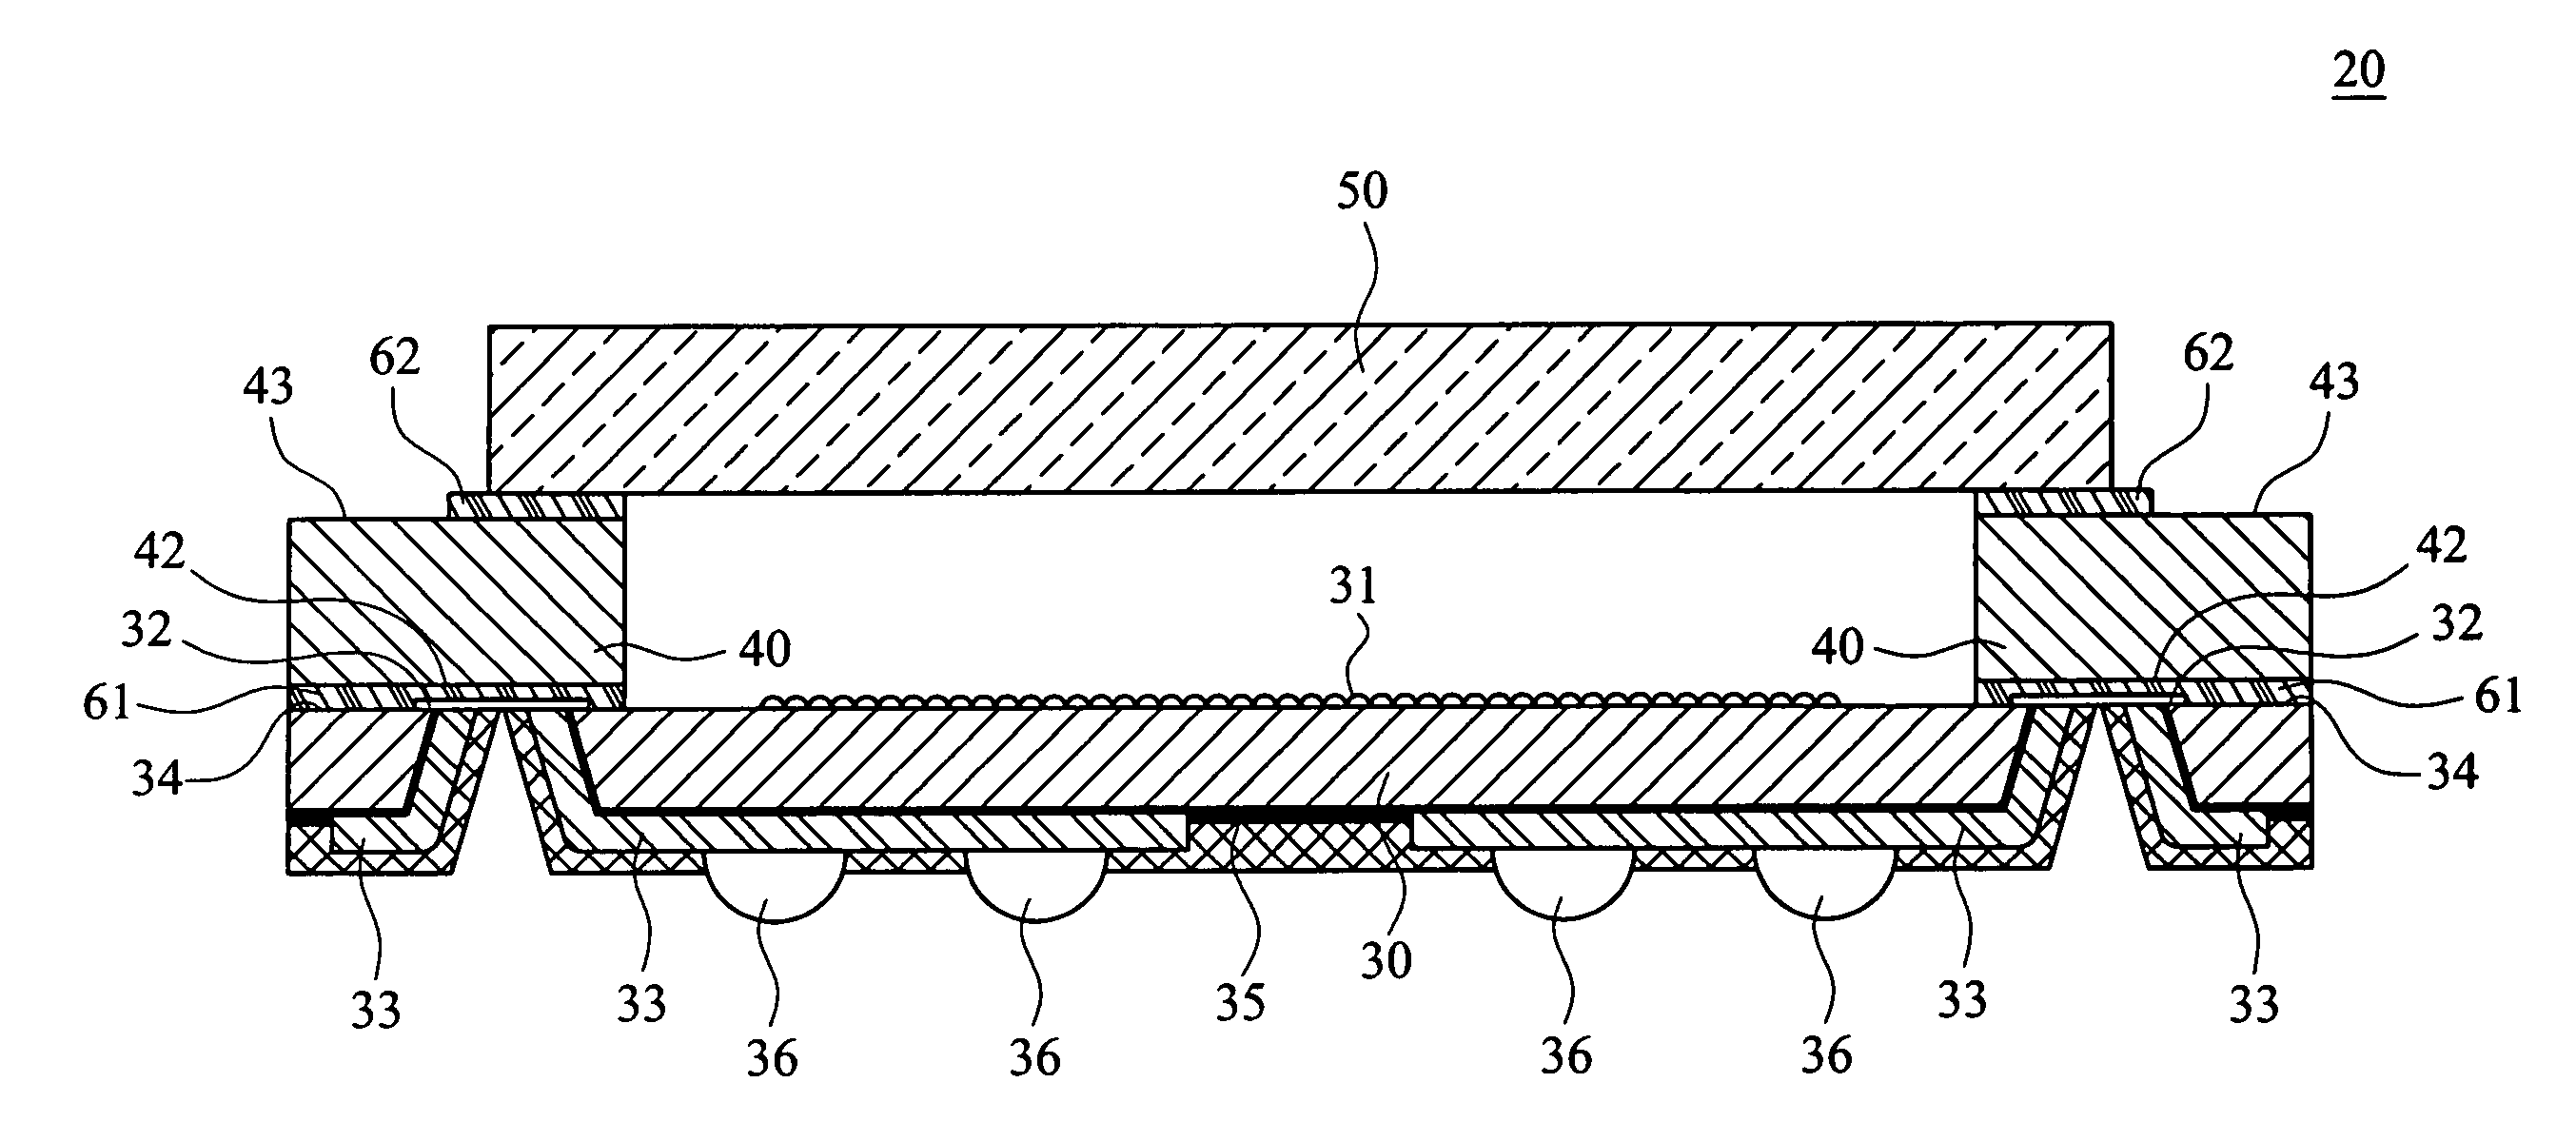 Image sensor module package structure with supporting element